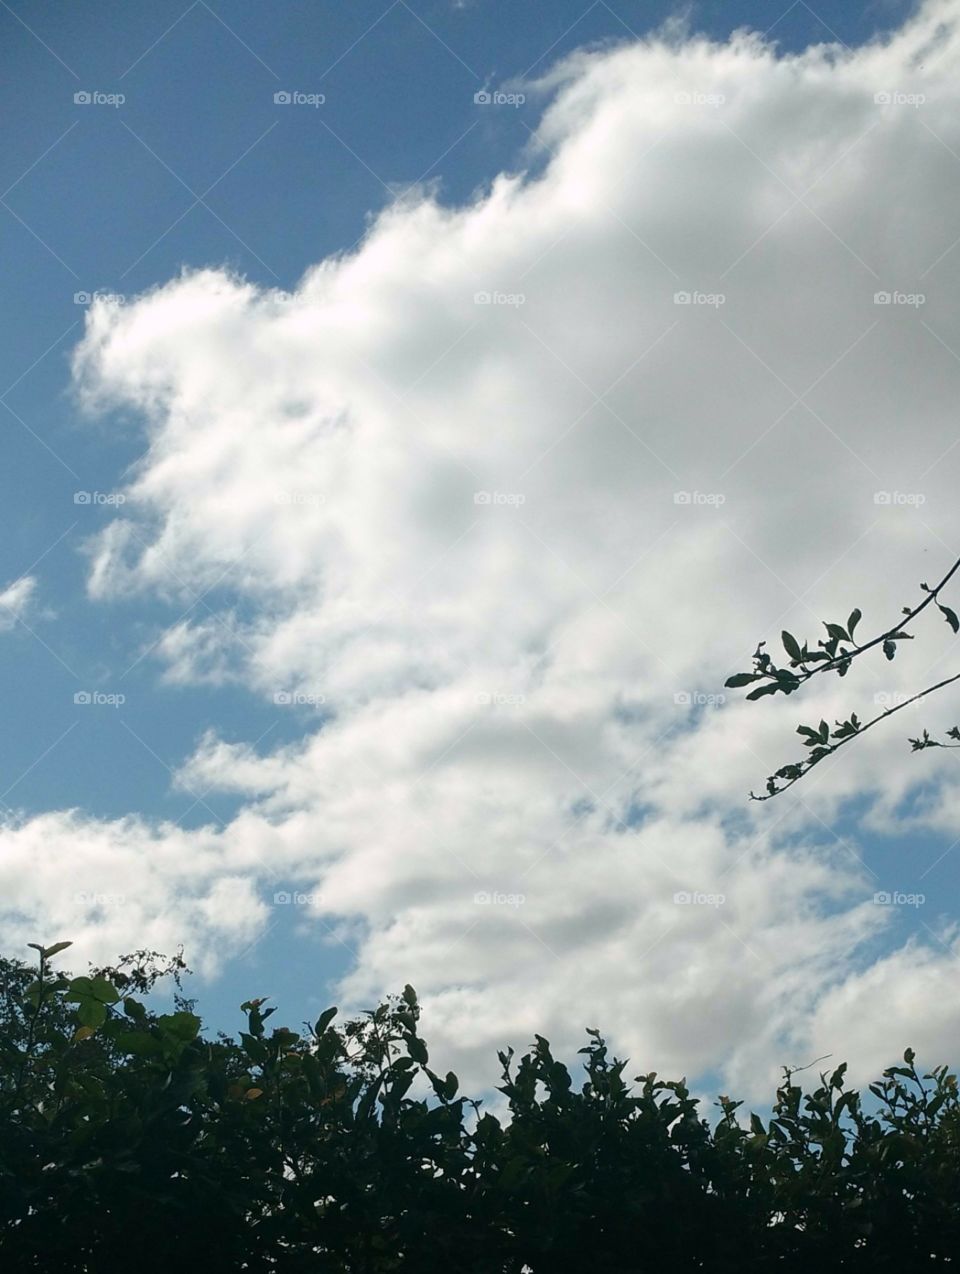 I took the picture through my window with my Motorola cell, the wind moves the plants from one side to another and the sky totally sunny, with some clouds making a warm shadow, which gives to my garden.